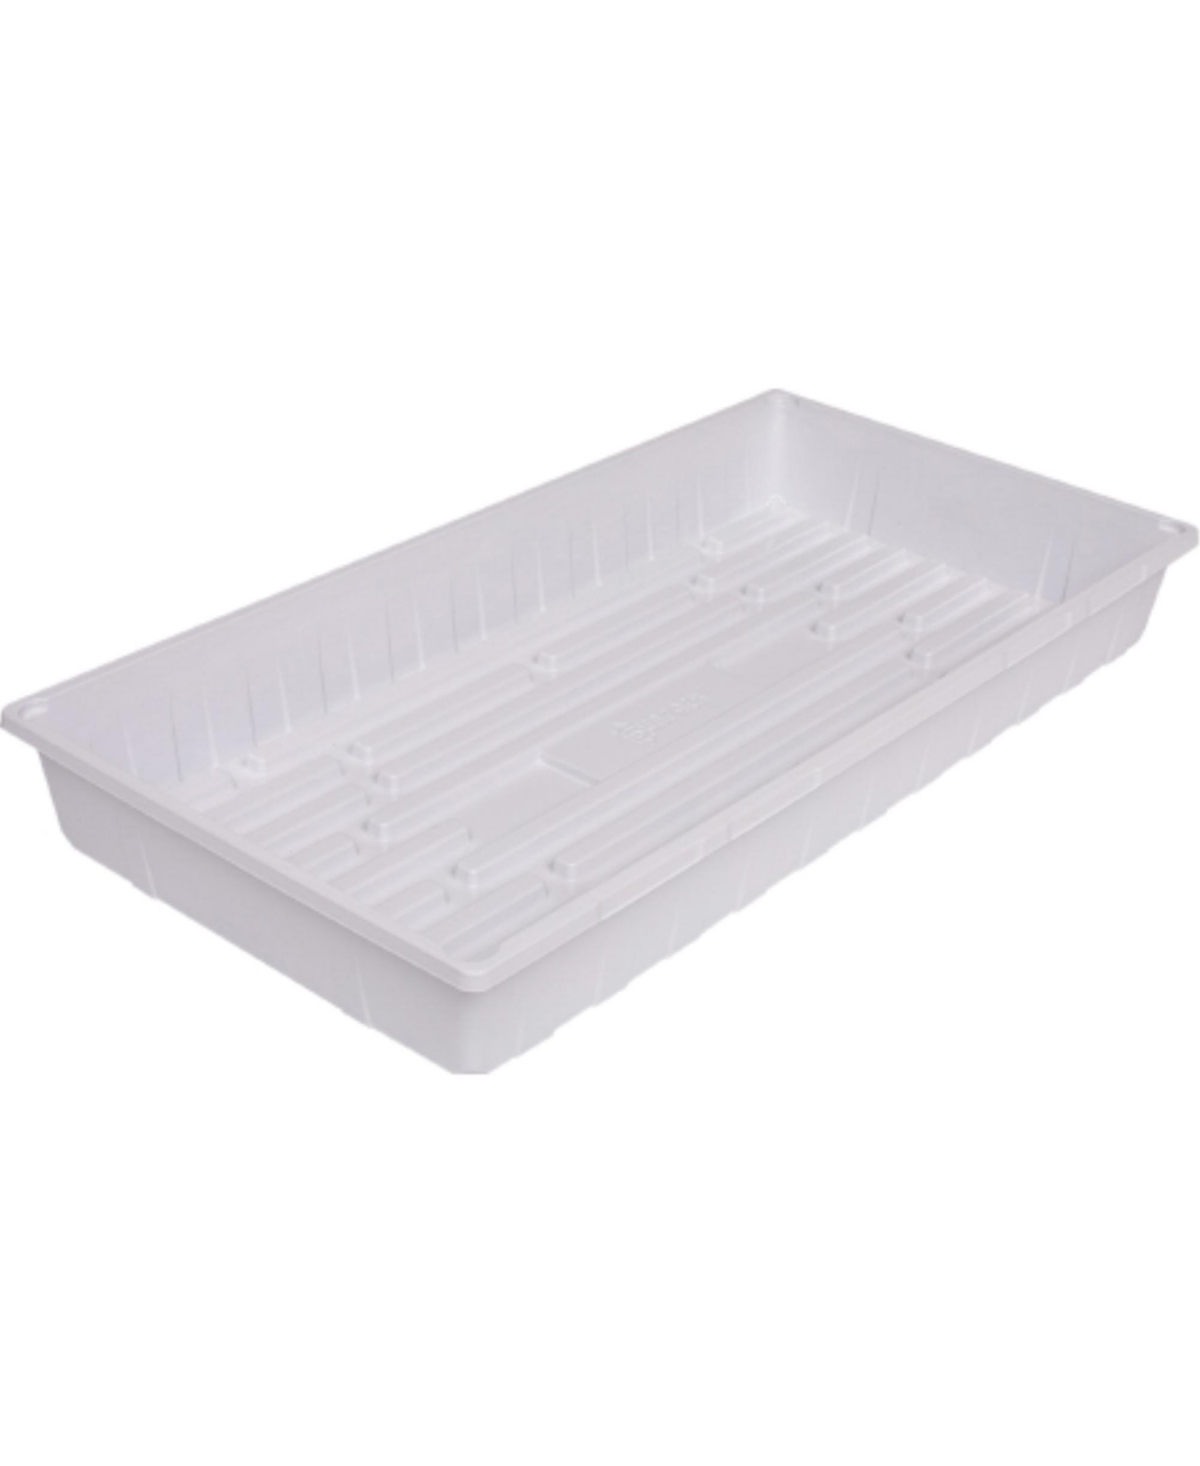 Indoor Gardening Reinforced Plastic Seed Propagation Tray, 10 x 20 Inches, White - White